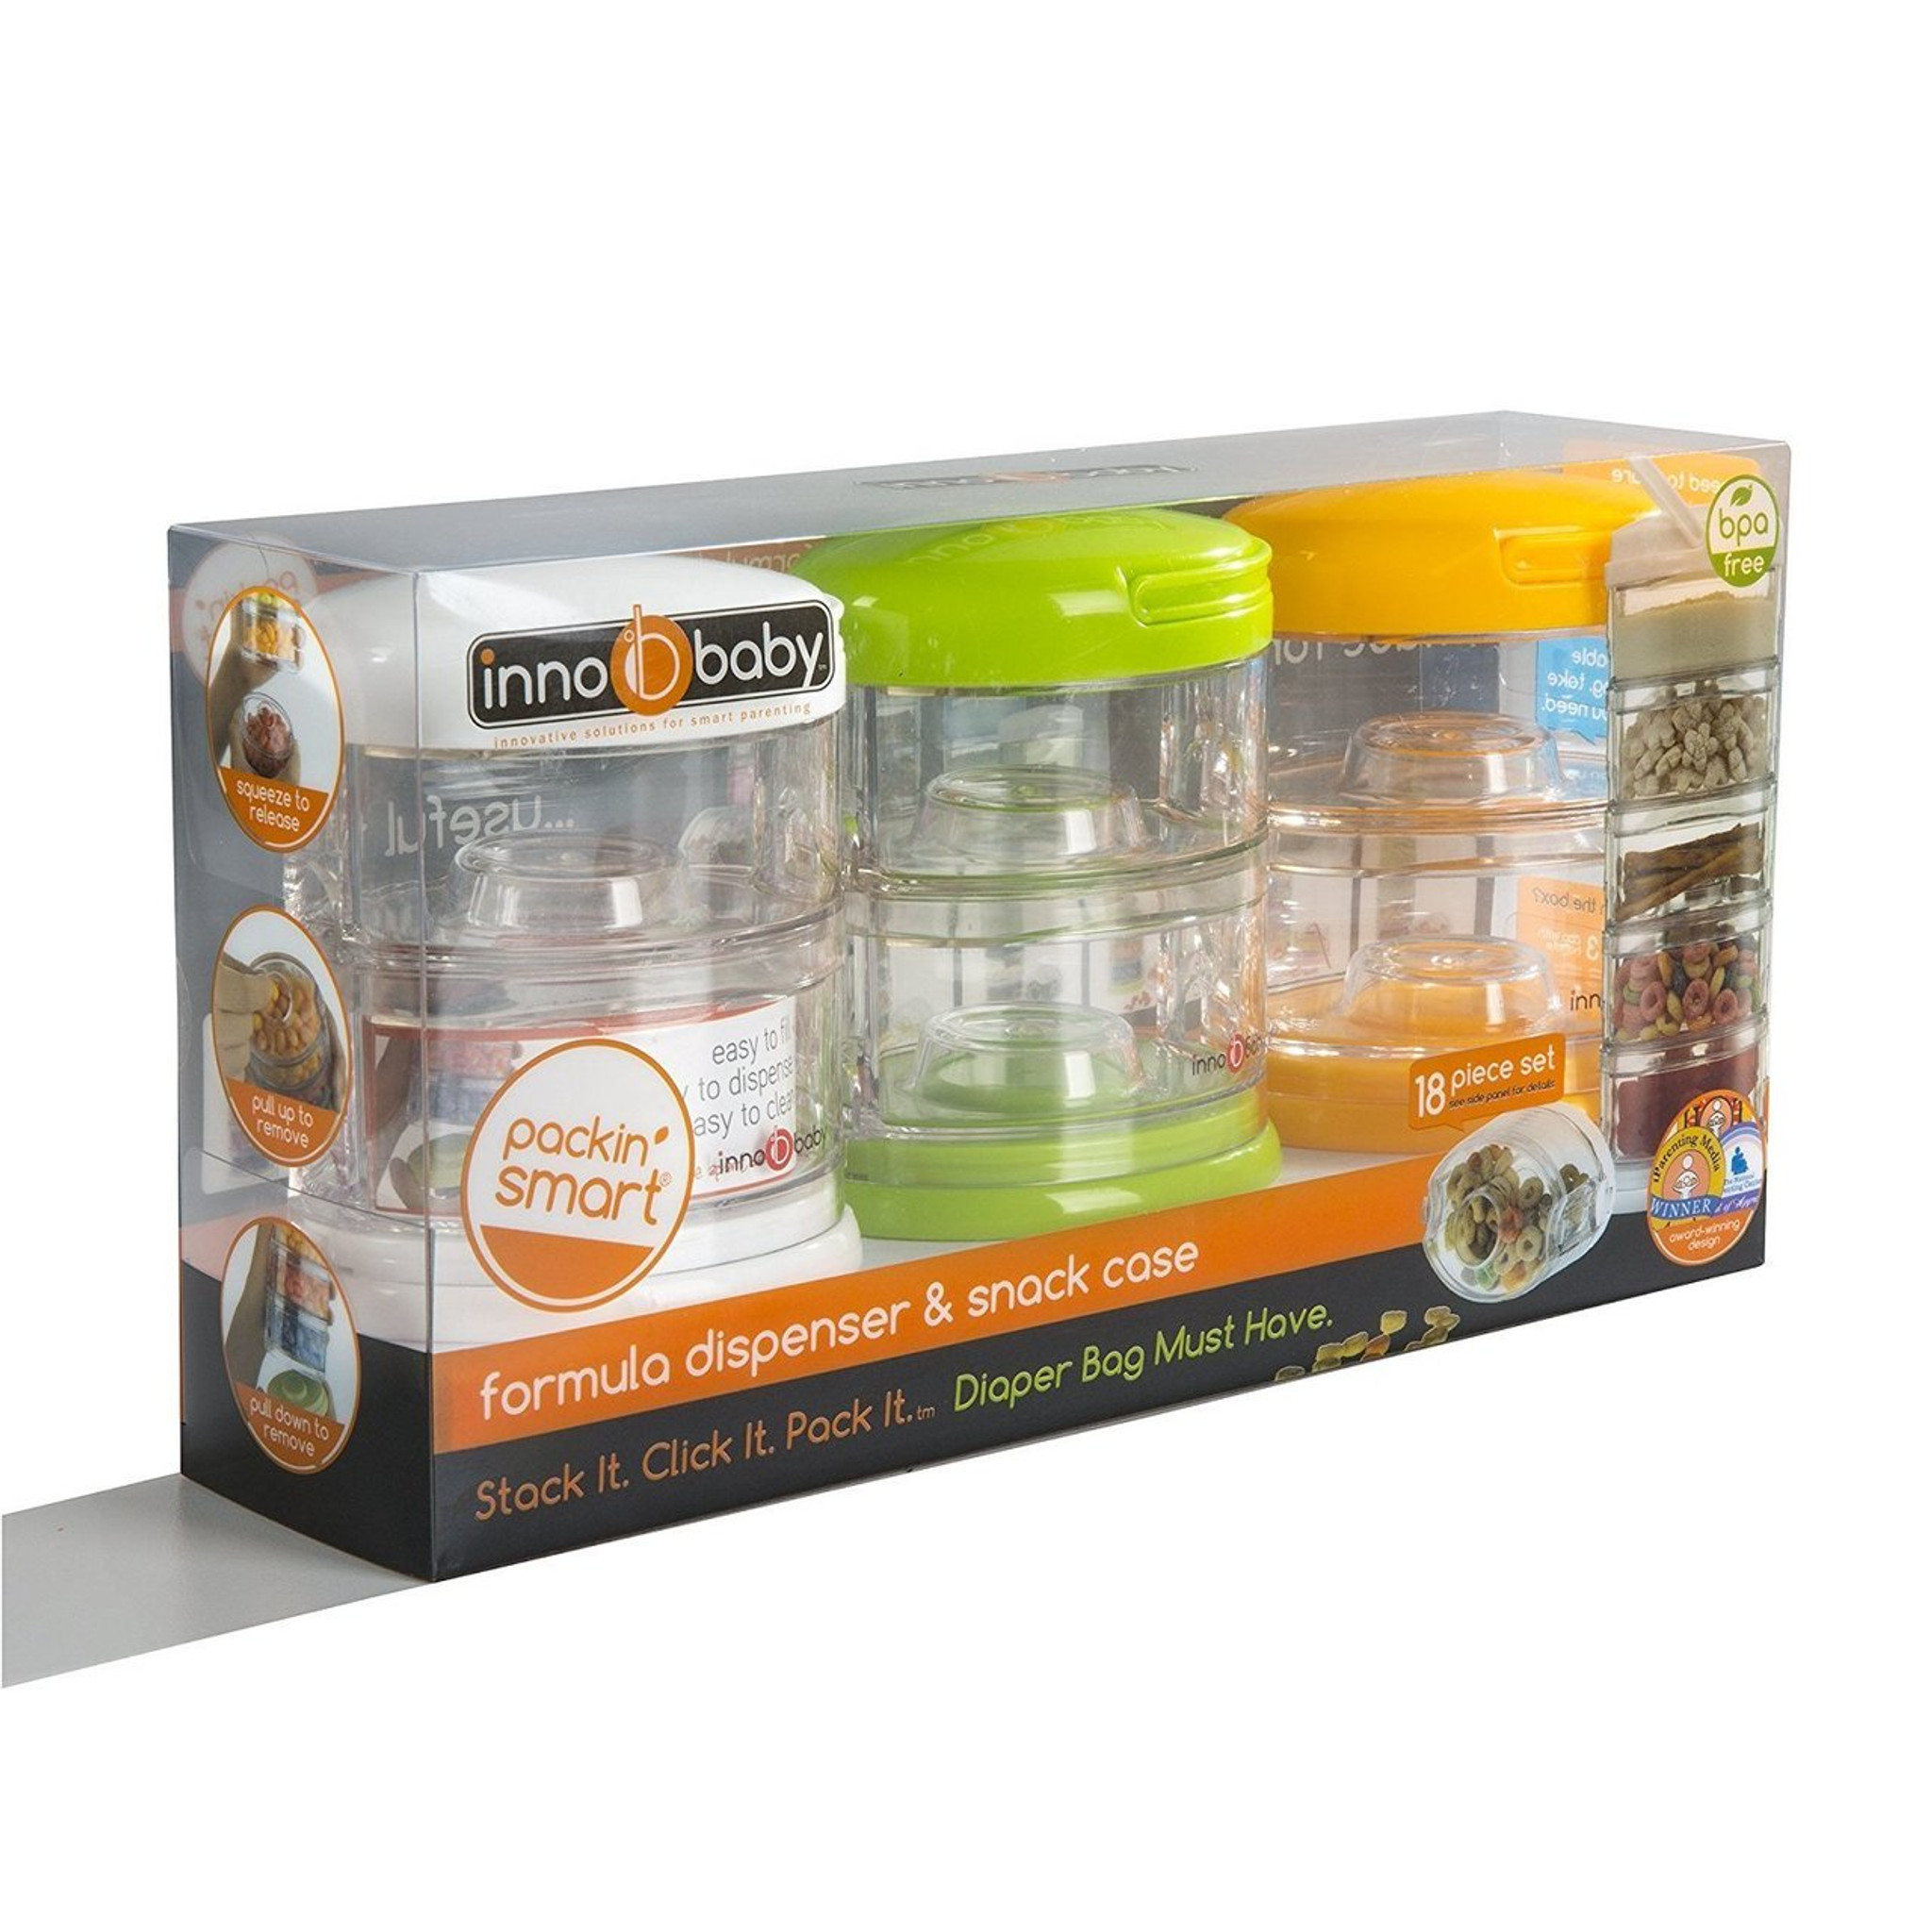 Innobaby Packin' Smart 3-Tier Stackable and Portable Storage System for  Formula, Liquid, Baby Snacks and more.